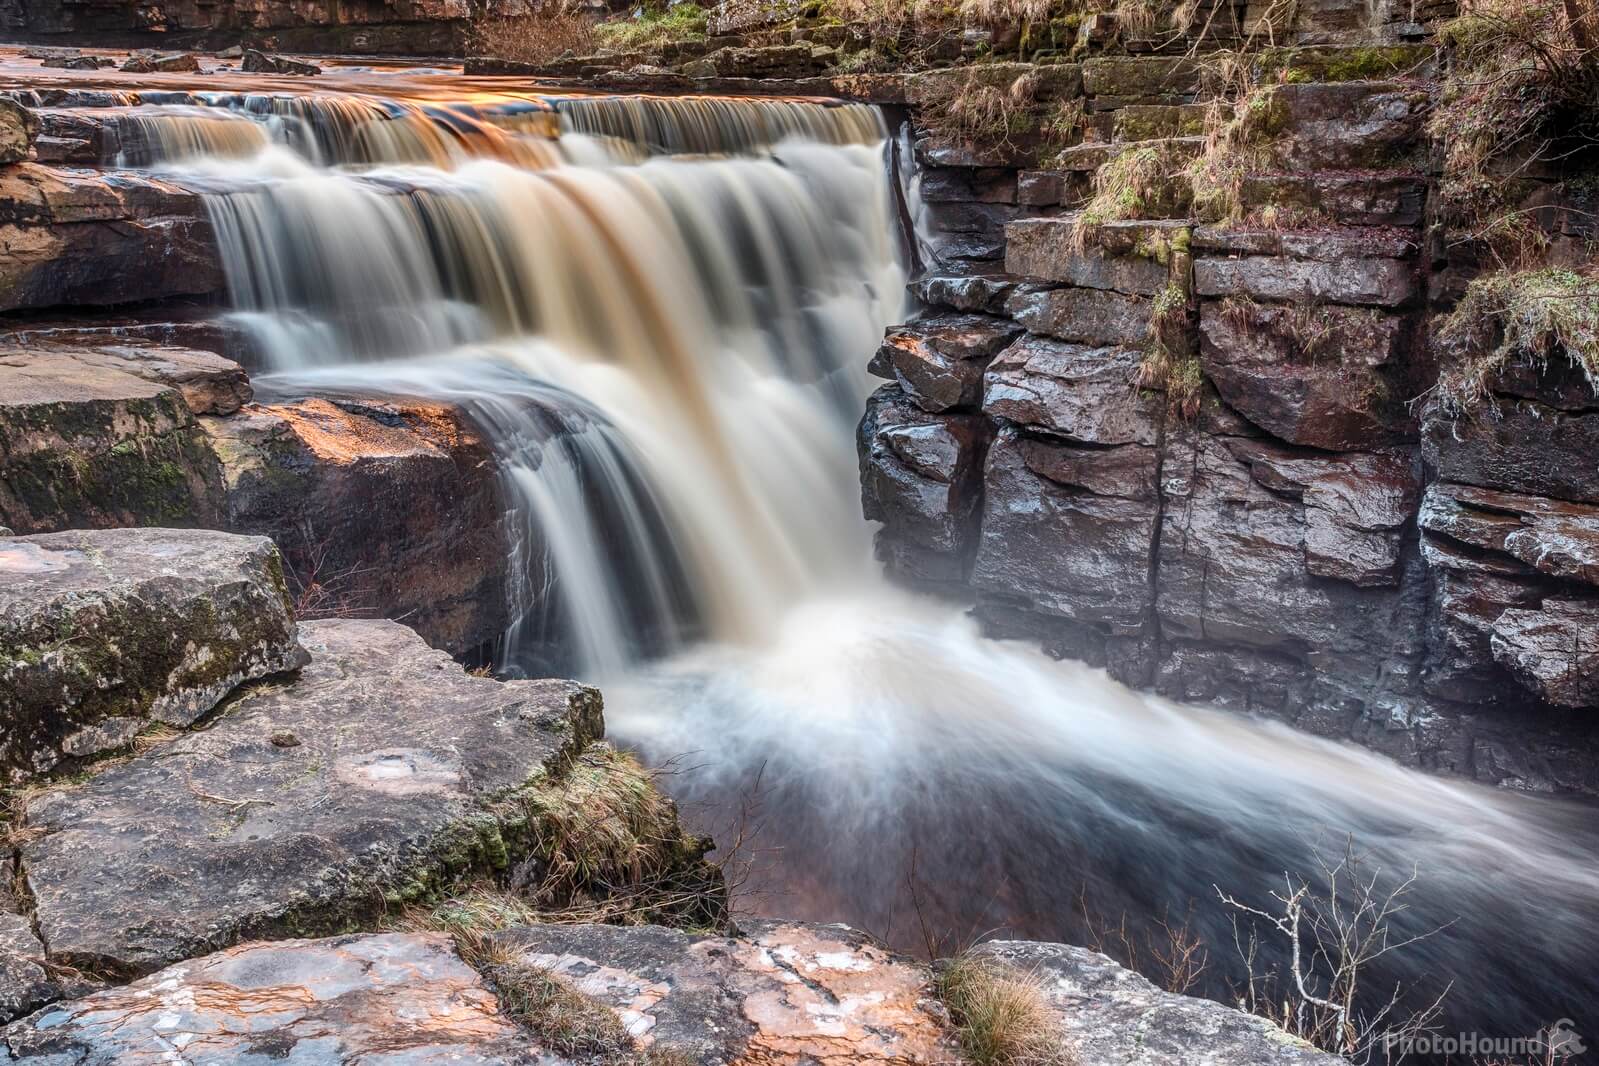 Image of Kisdon Force by Andy Killingbeck